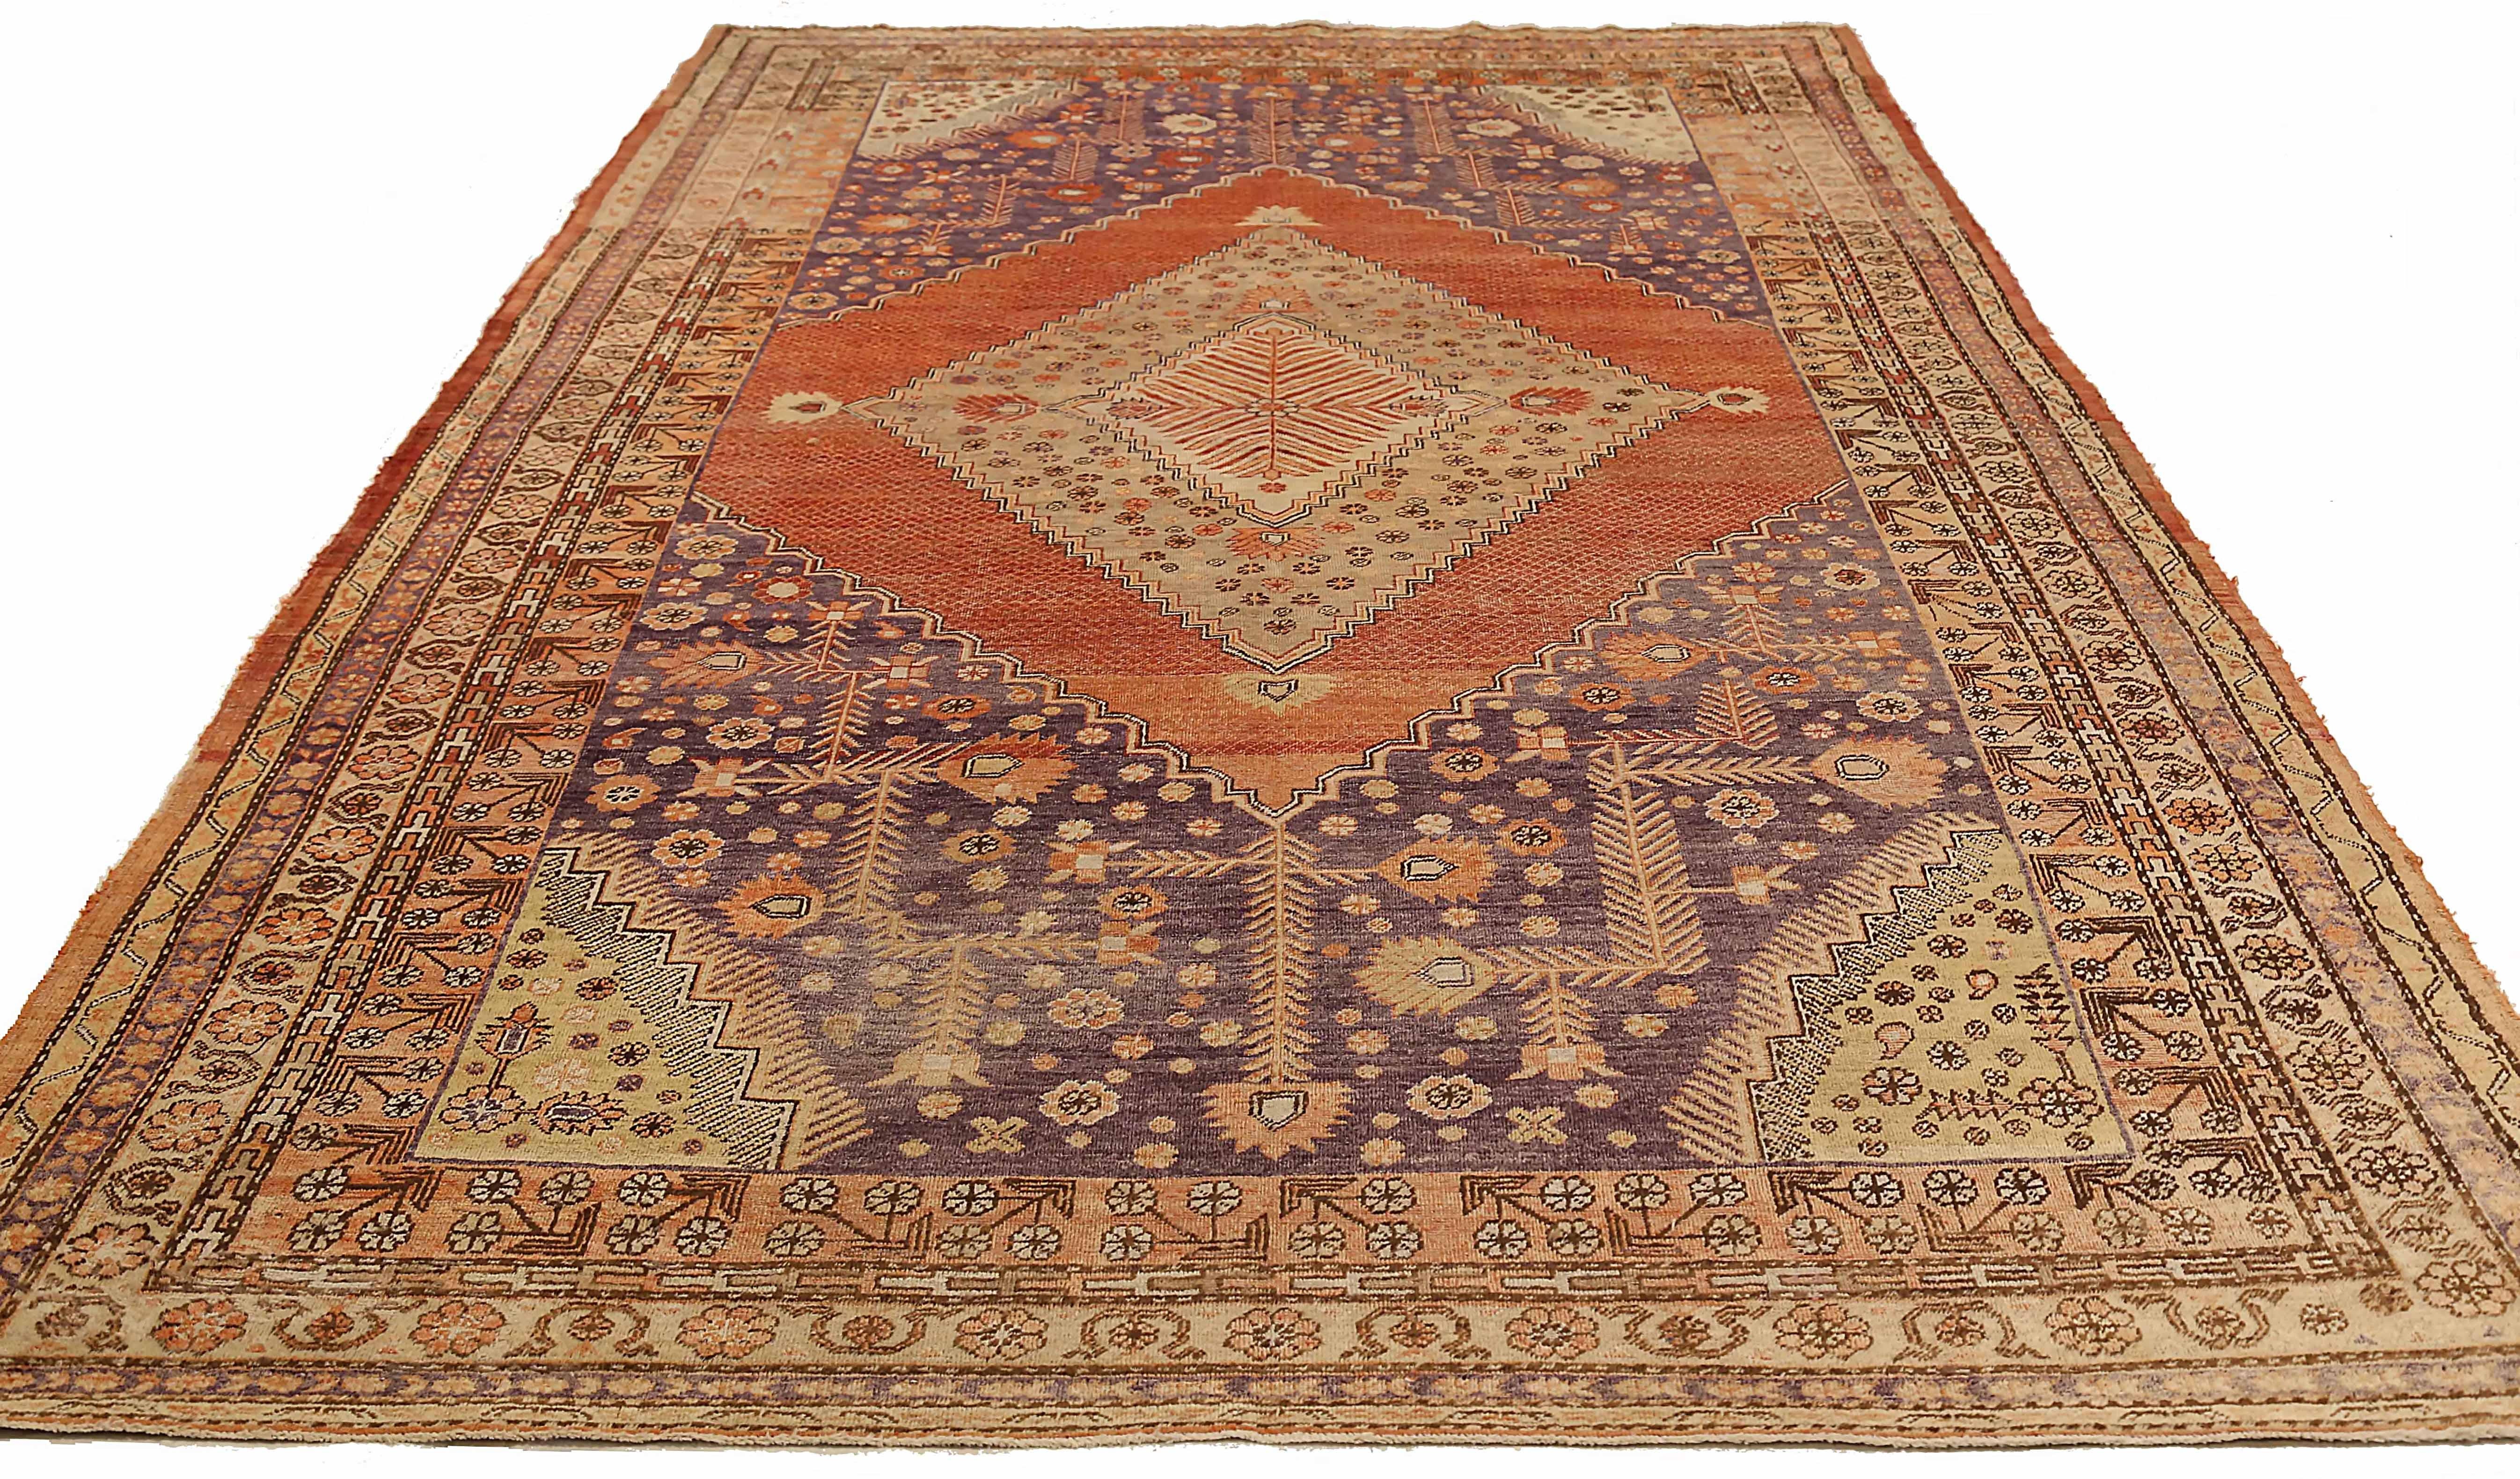 Antique Uzbekistan area rug handwoven from the finest sheep’s wool. It’s colored with all-natural vegetable dyes that are safe for humans and pets. It’s a traditional Khotan design handwoven by expert artisans. It’s a lovely area rug that can be